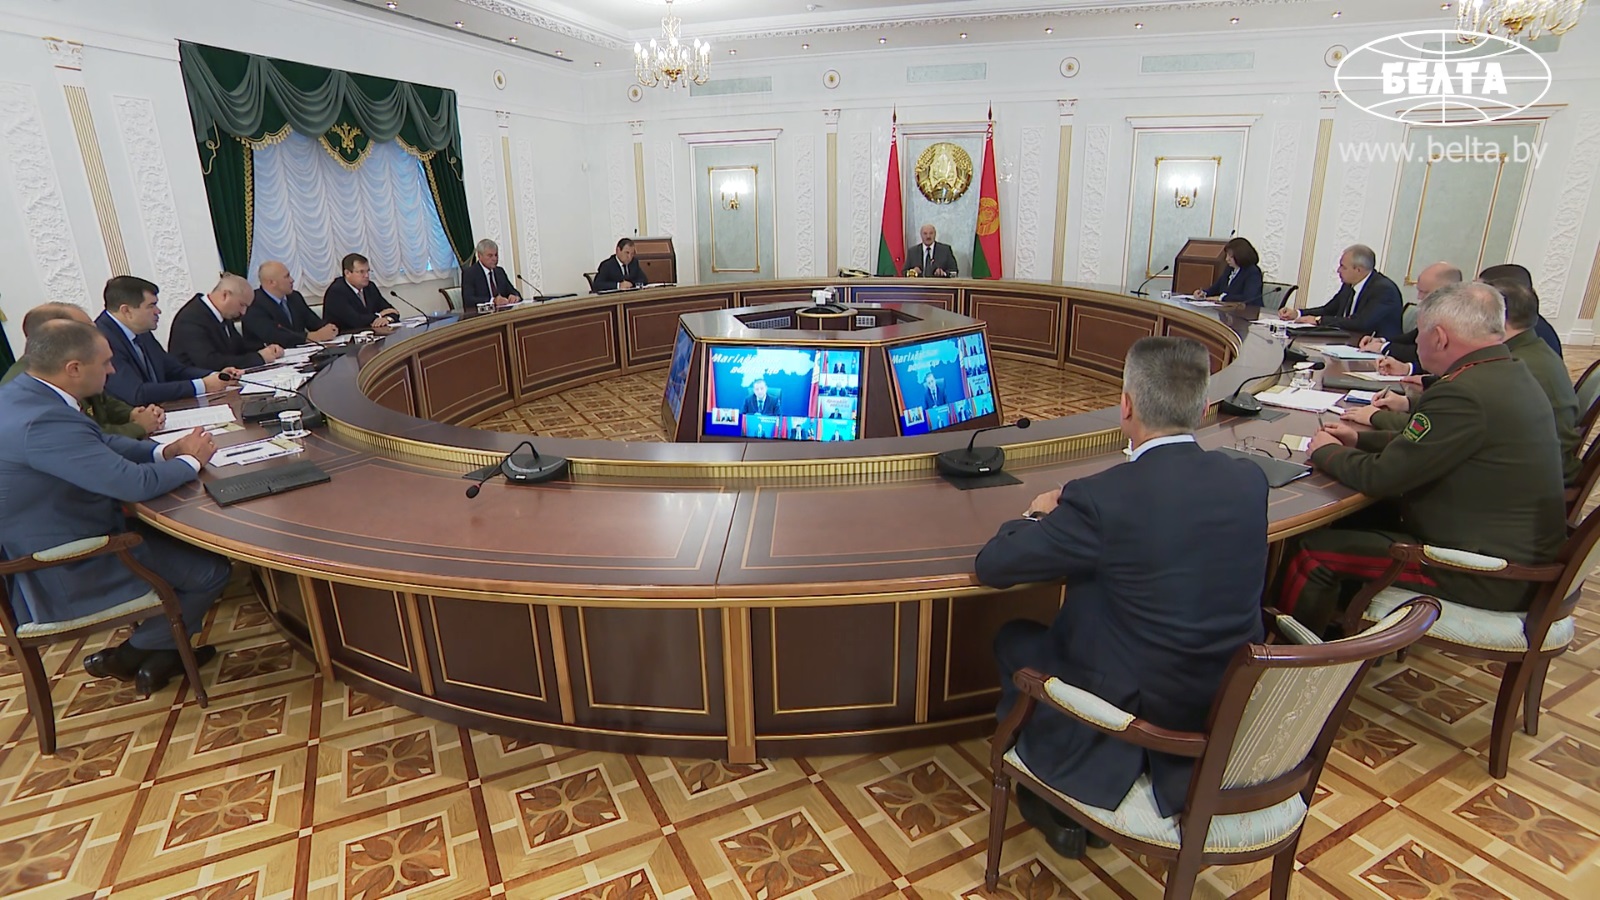 The Belarusian Security Council will receive additional powers